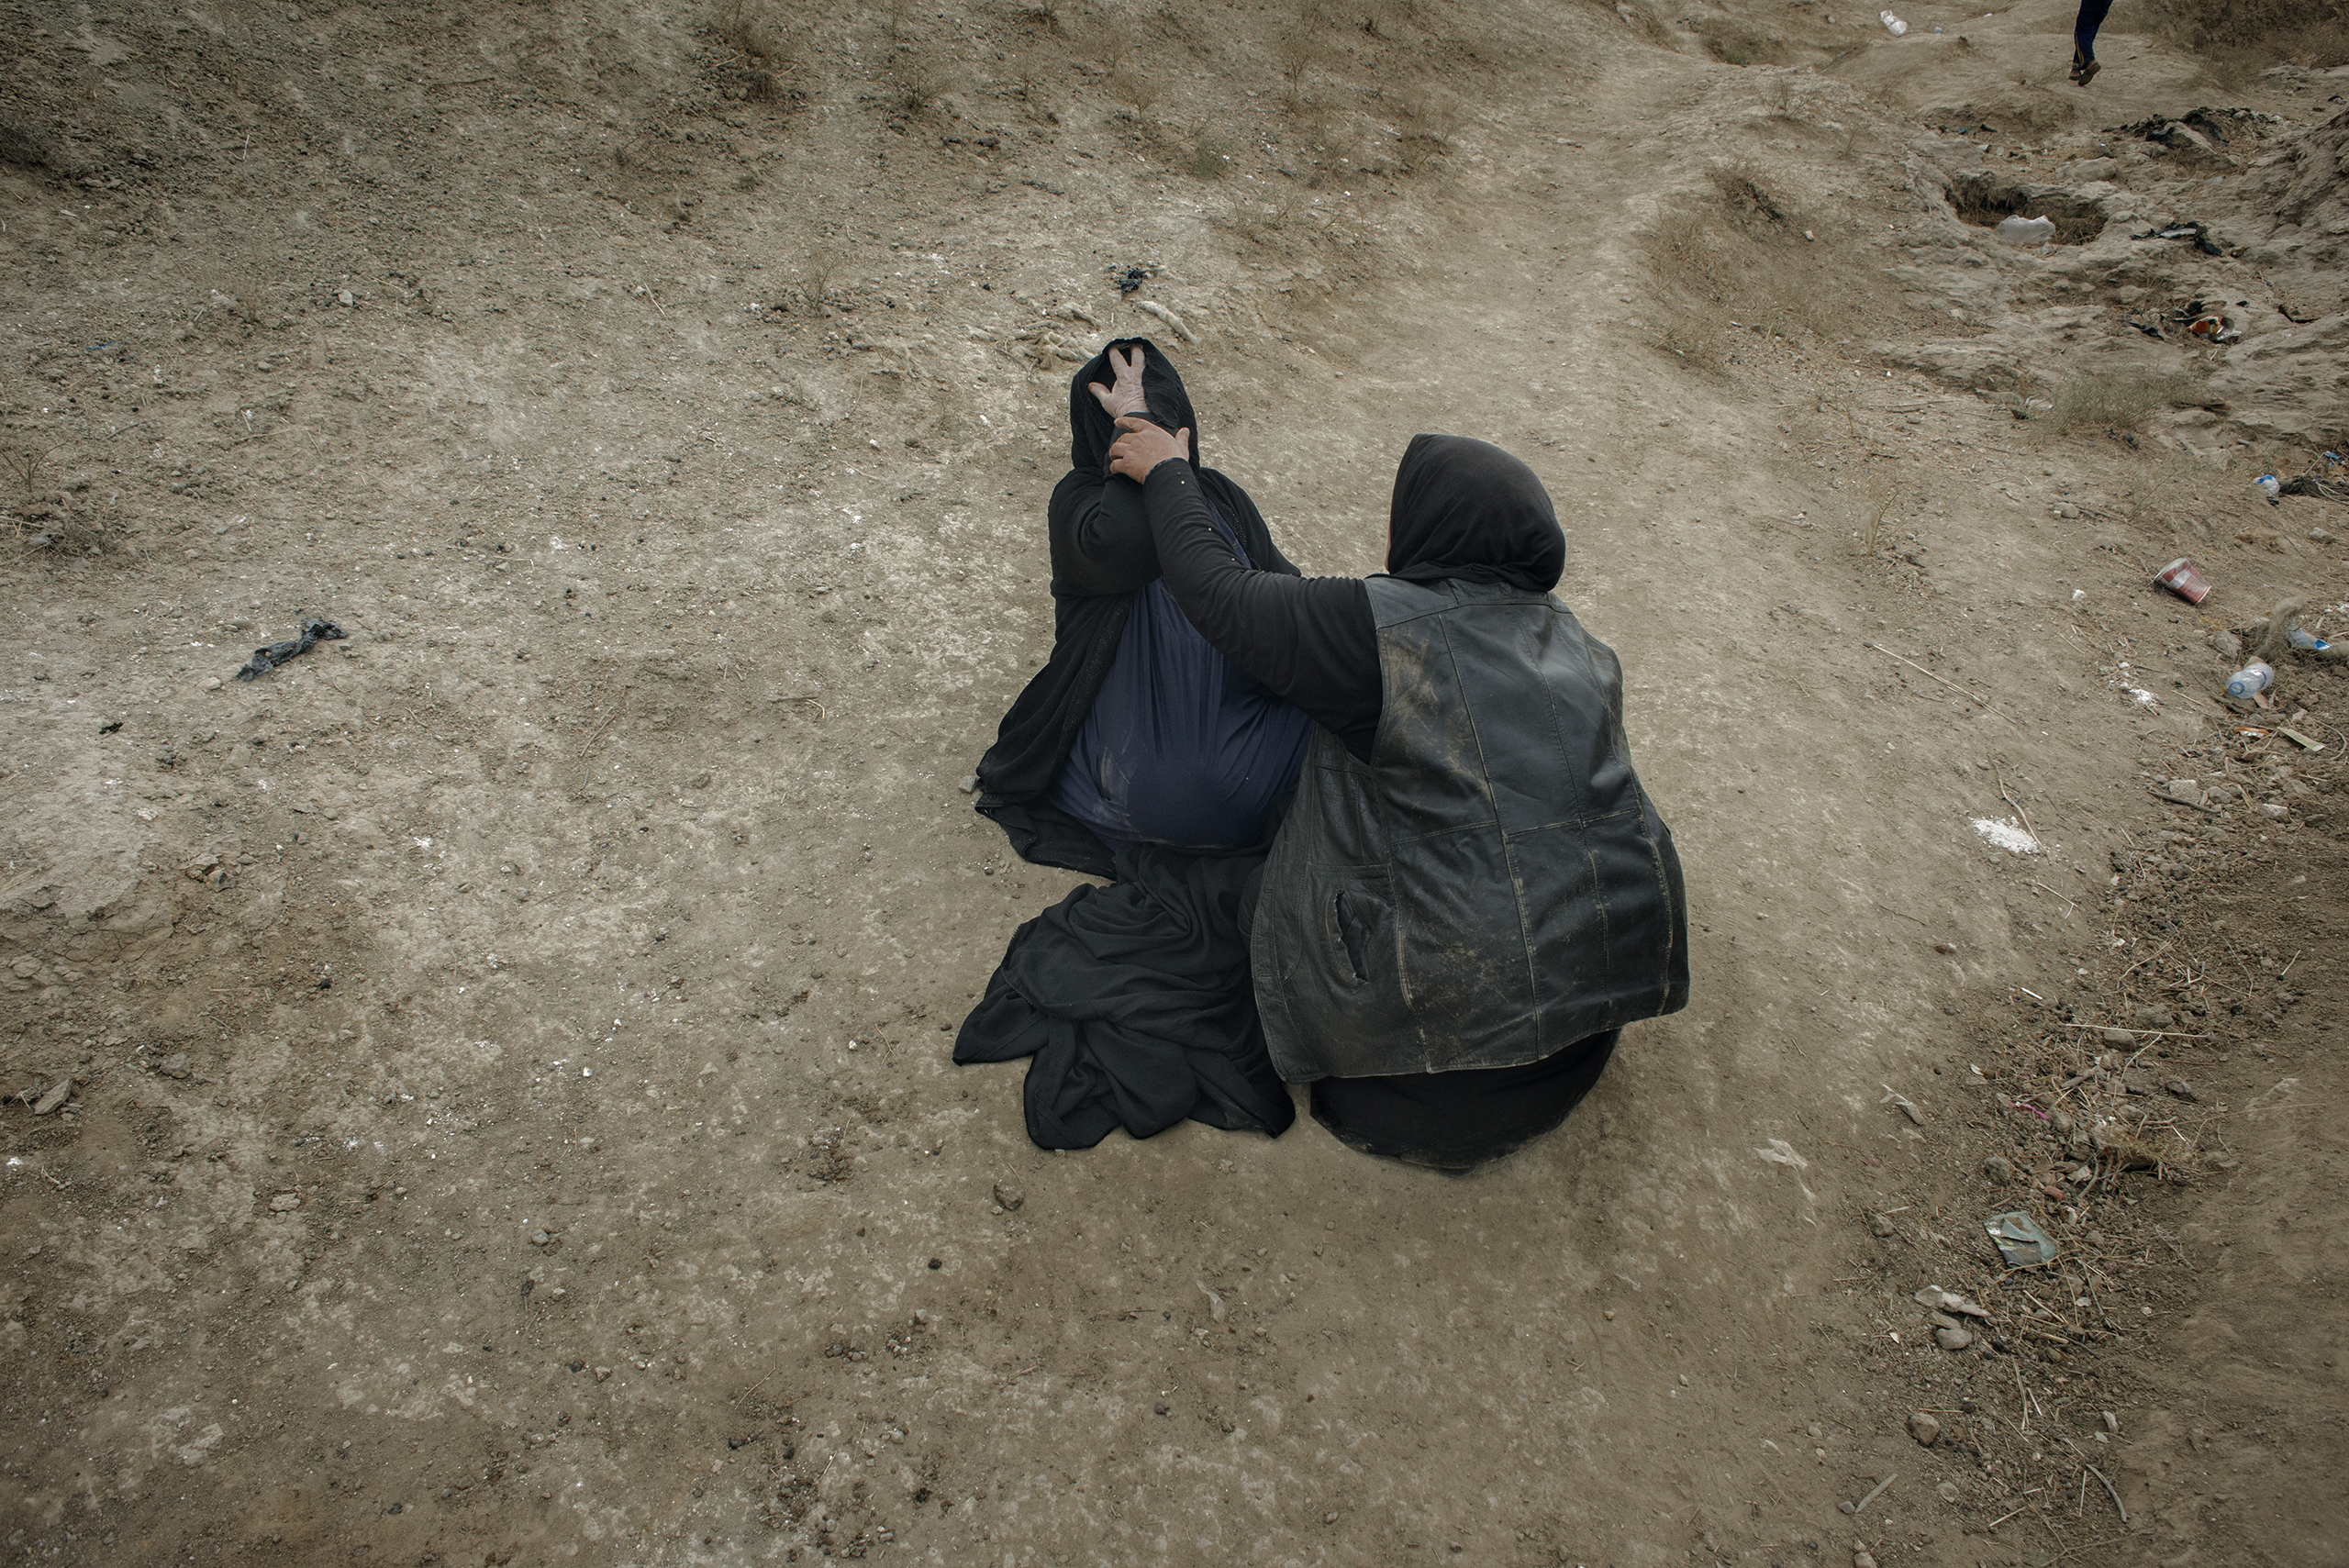 A woman comforts another woman whose son was taken by ISIS as they tried to cross the Tigris River in northern Iraq.